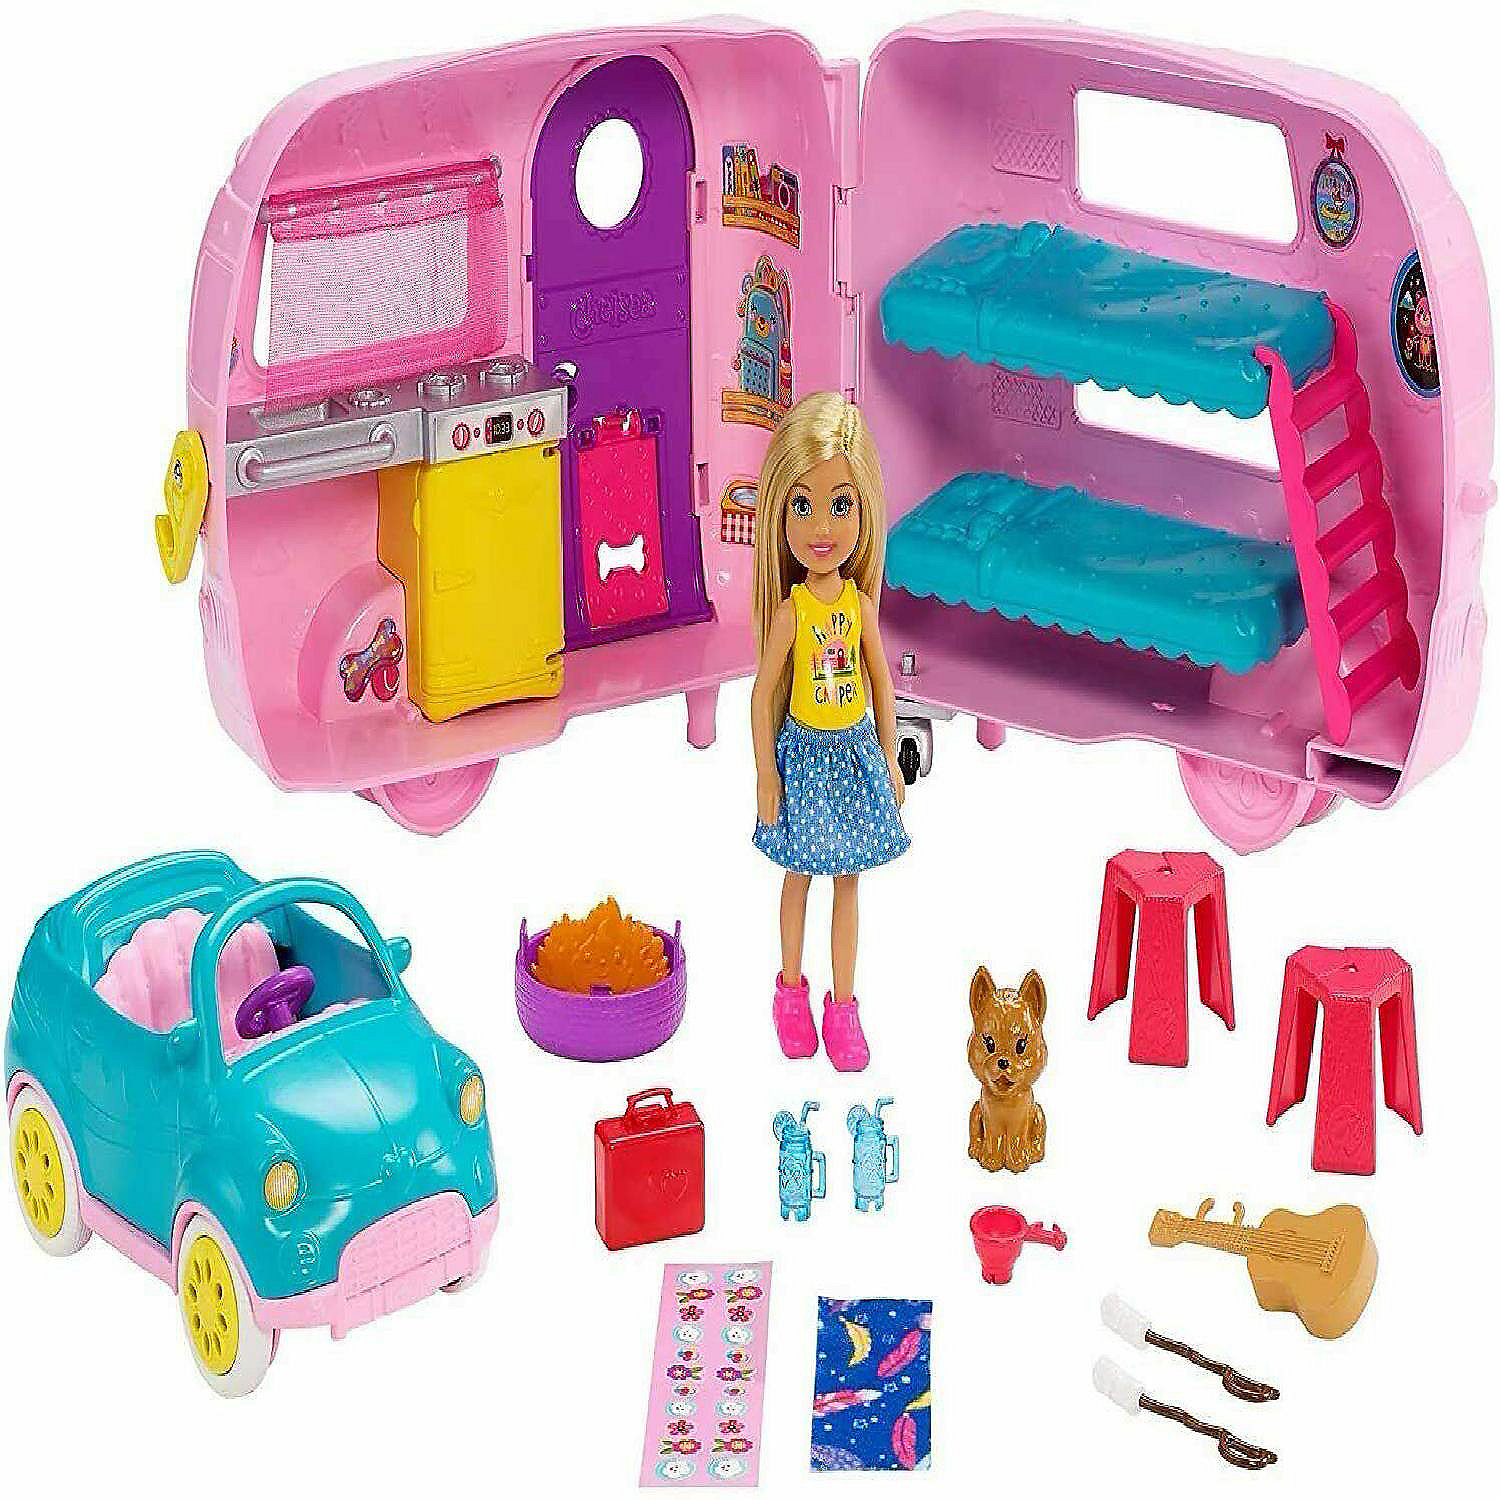 Club Chelsea Camper Playset with Chelsea Doll, Puppy, Car, Camper, Firepit, Guitar 10 Accessories, | Oriental Trading